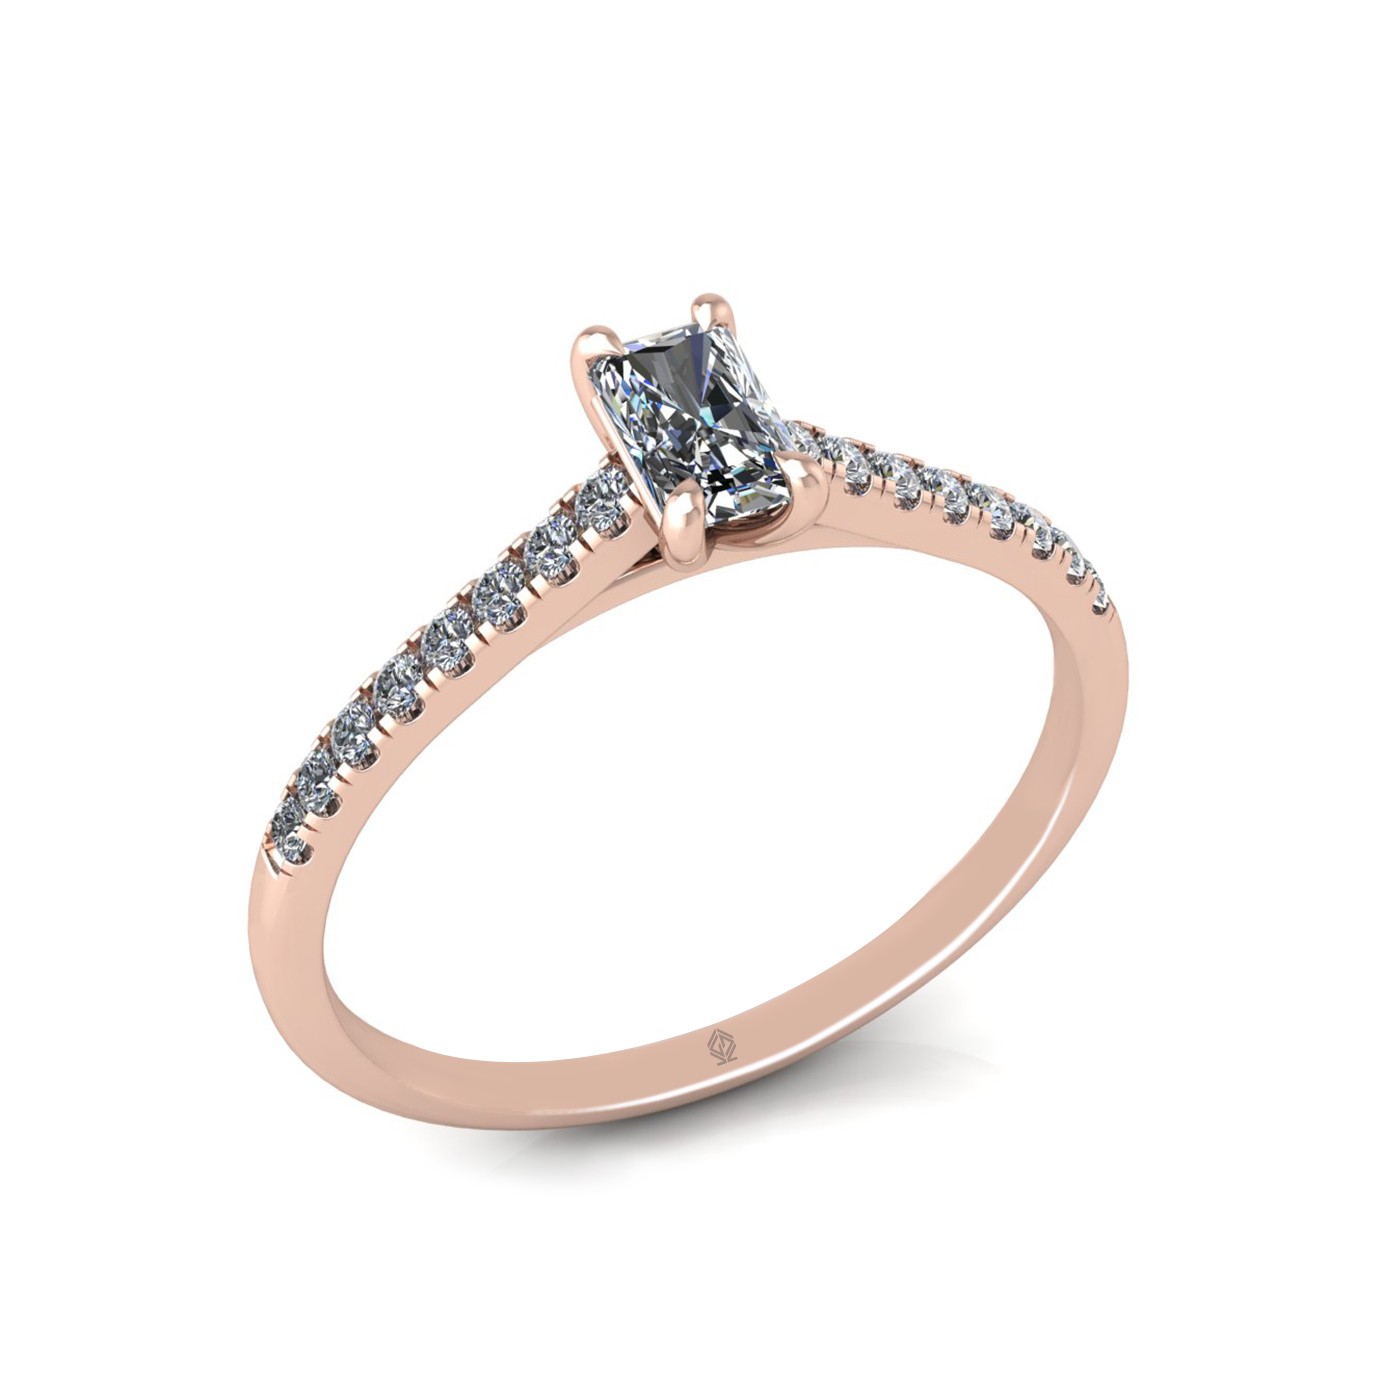 18k rose gold  0,30 ct 4 prongs radiant cut diamond engagement ring with whisper thin pavÉ set band